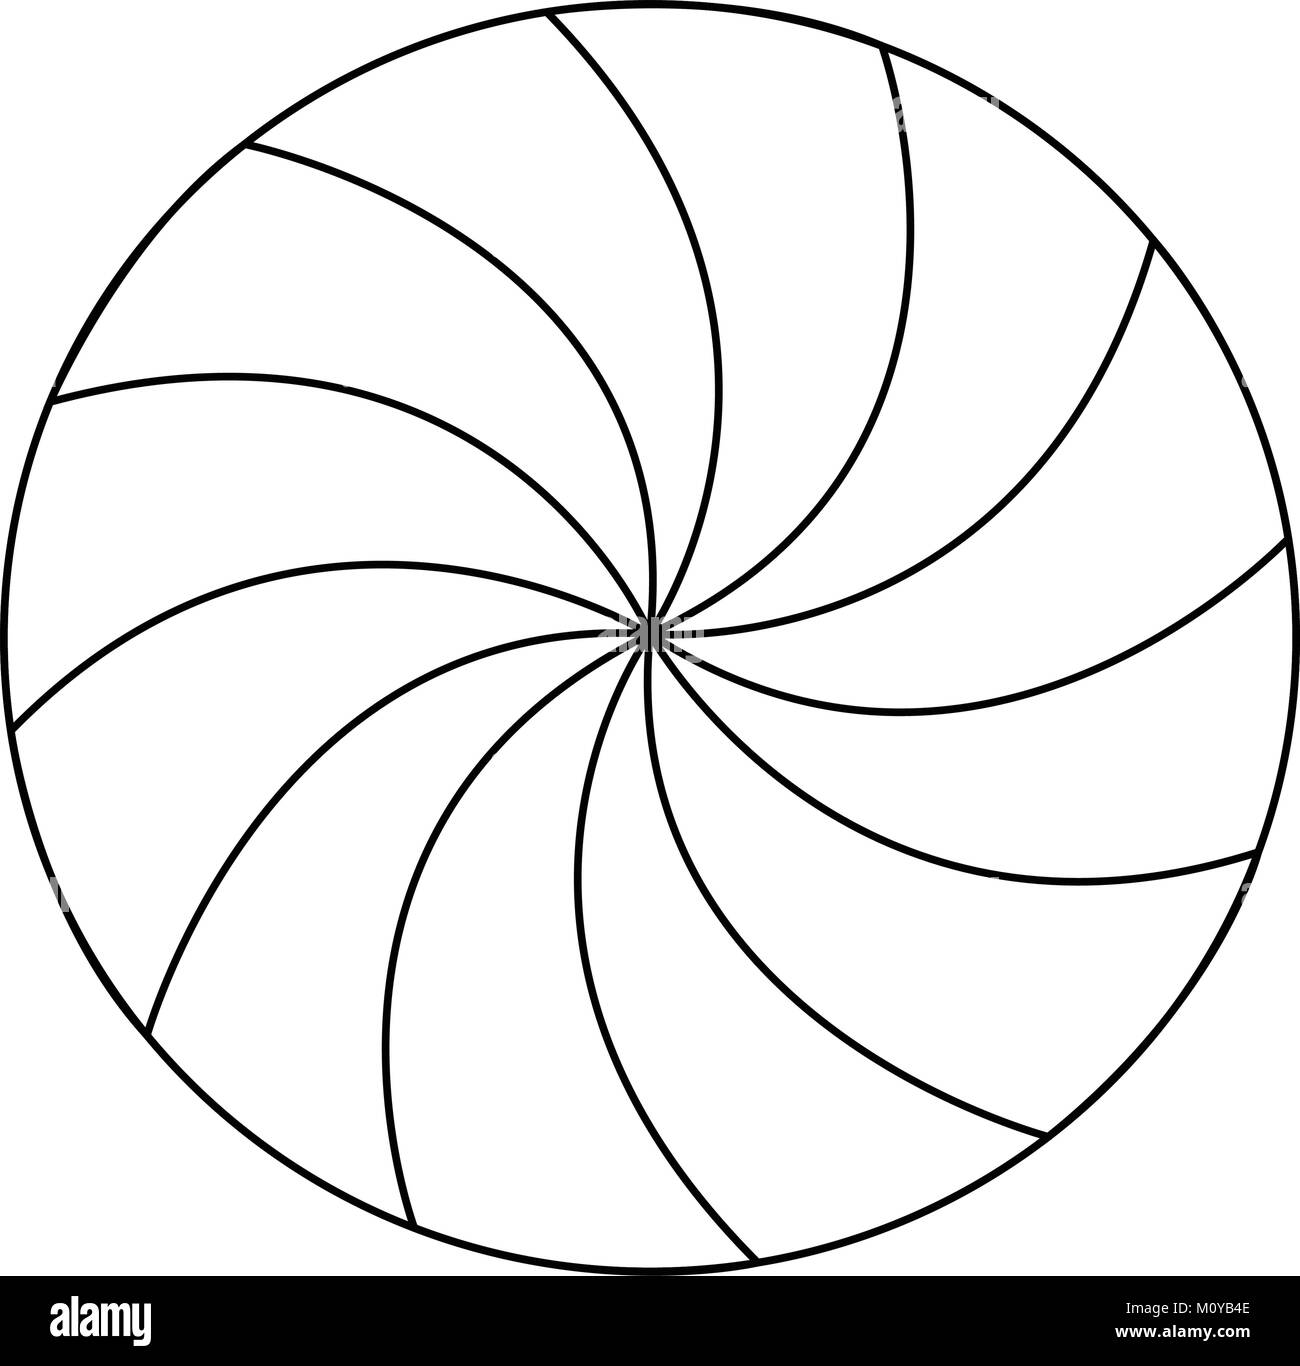 peppermint coloring page